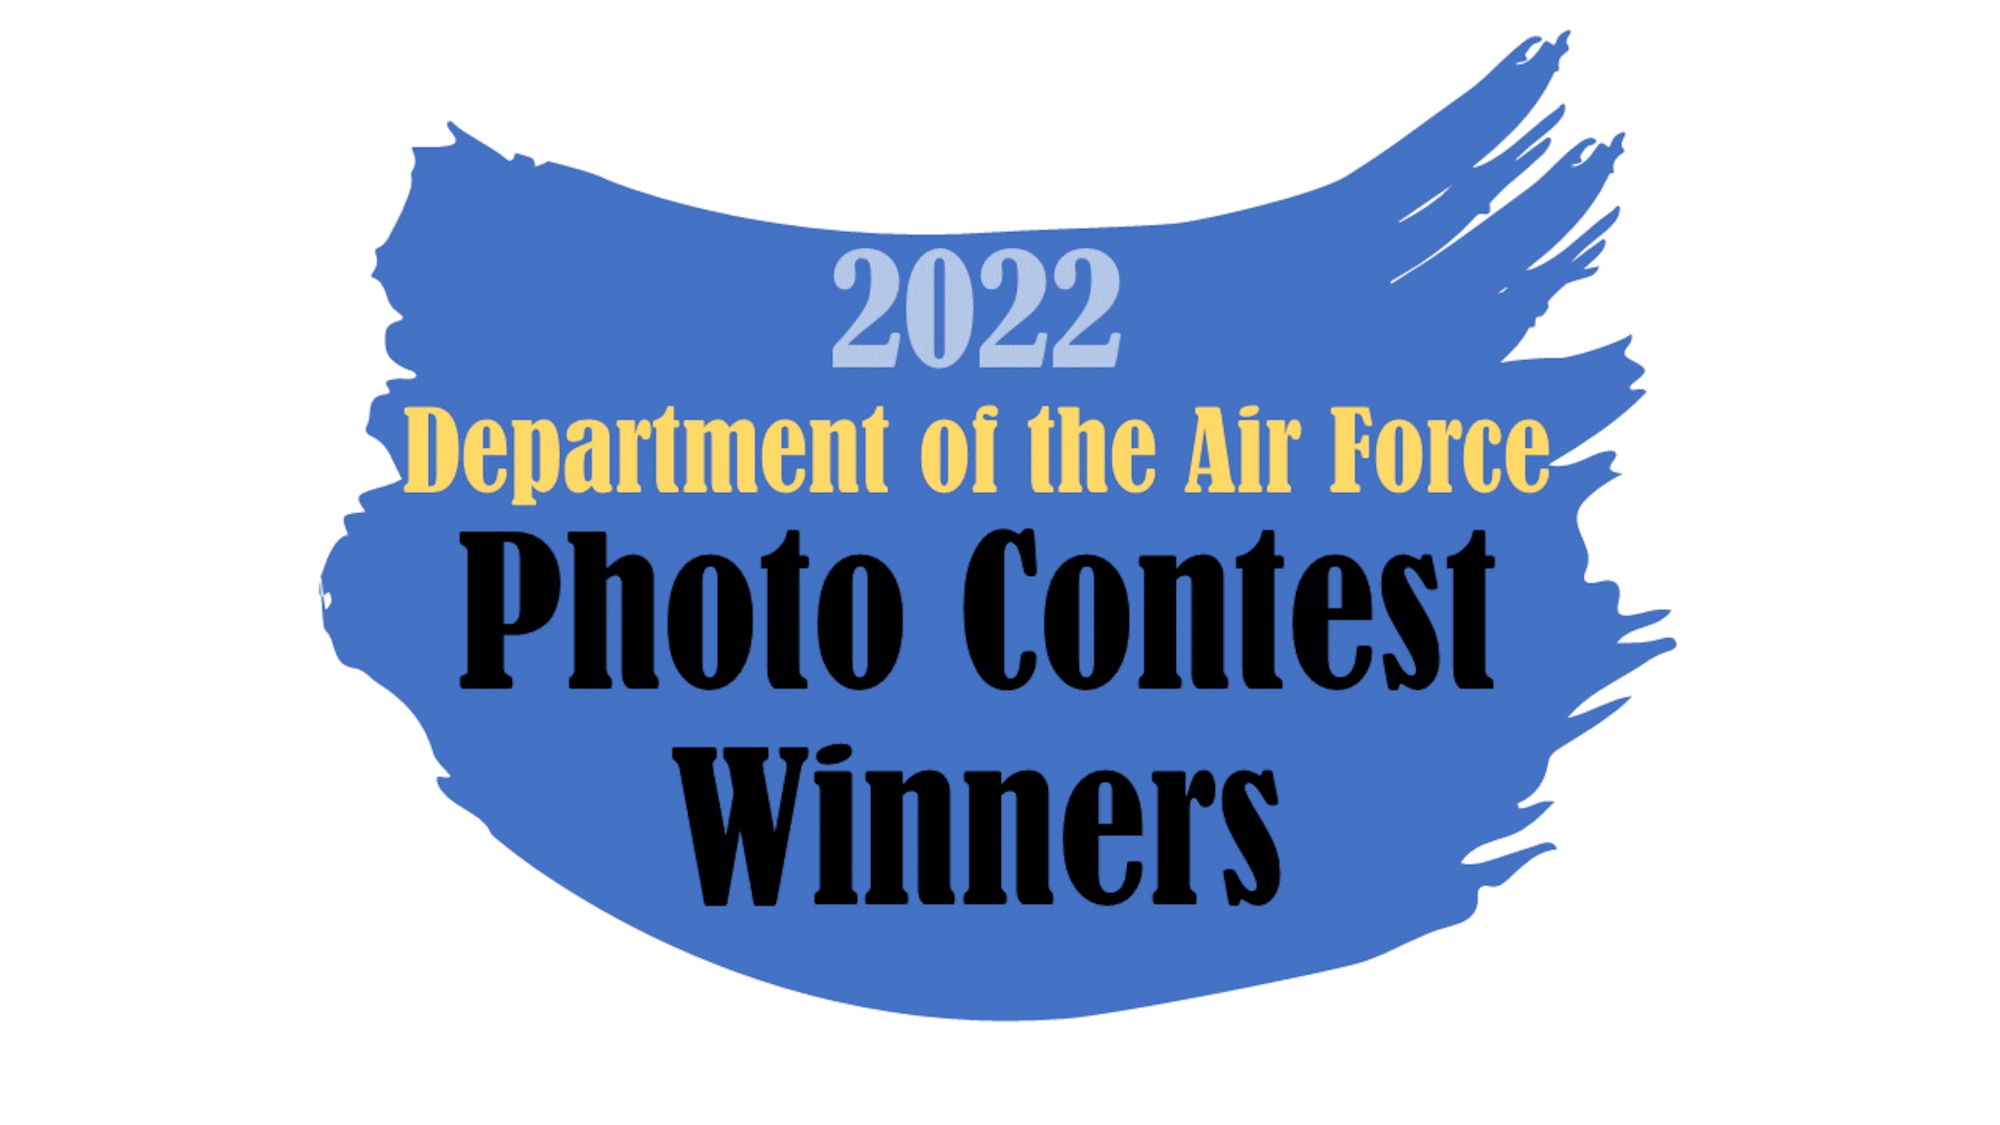   
																DAF announces 2022 Photo Contest winners 
															 